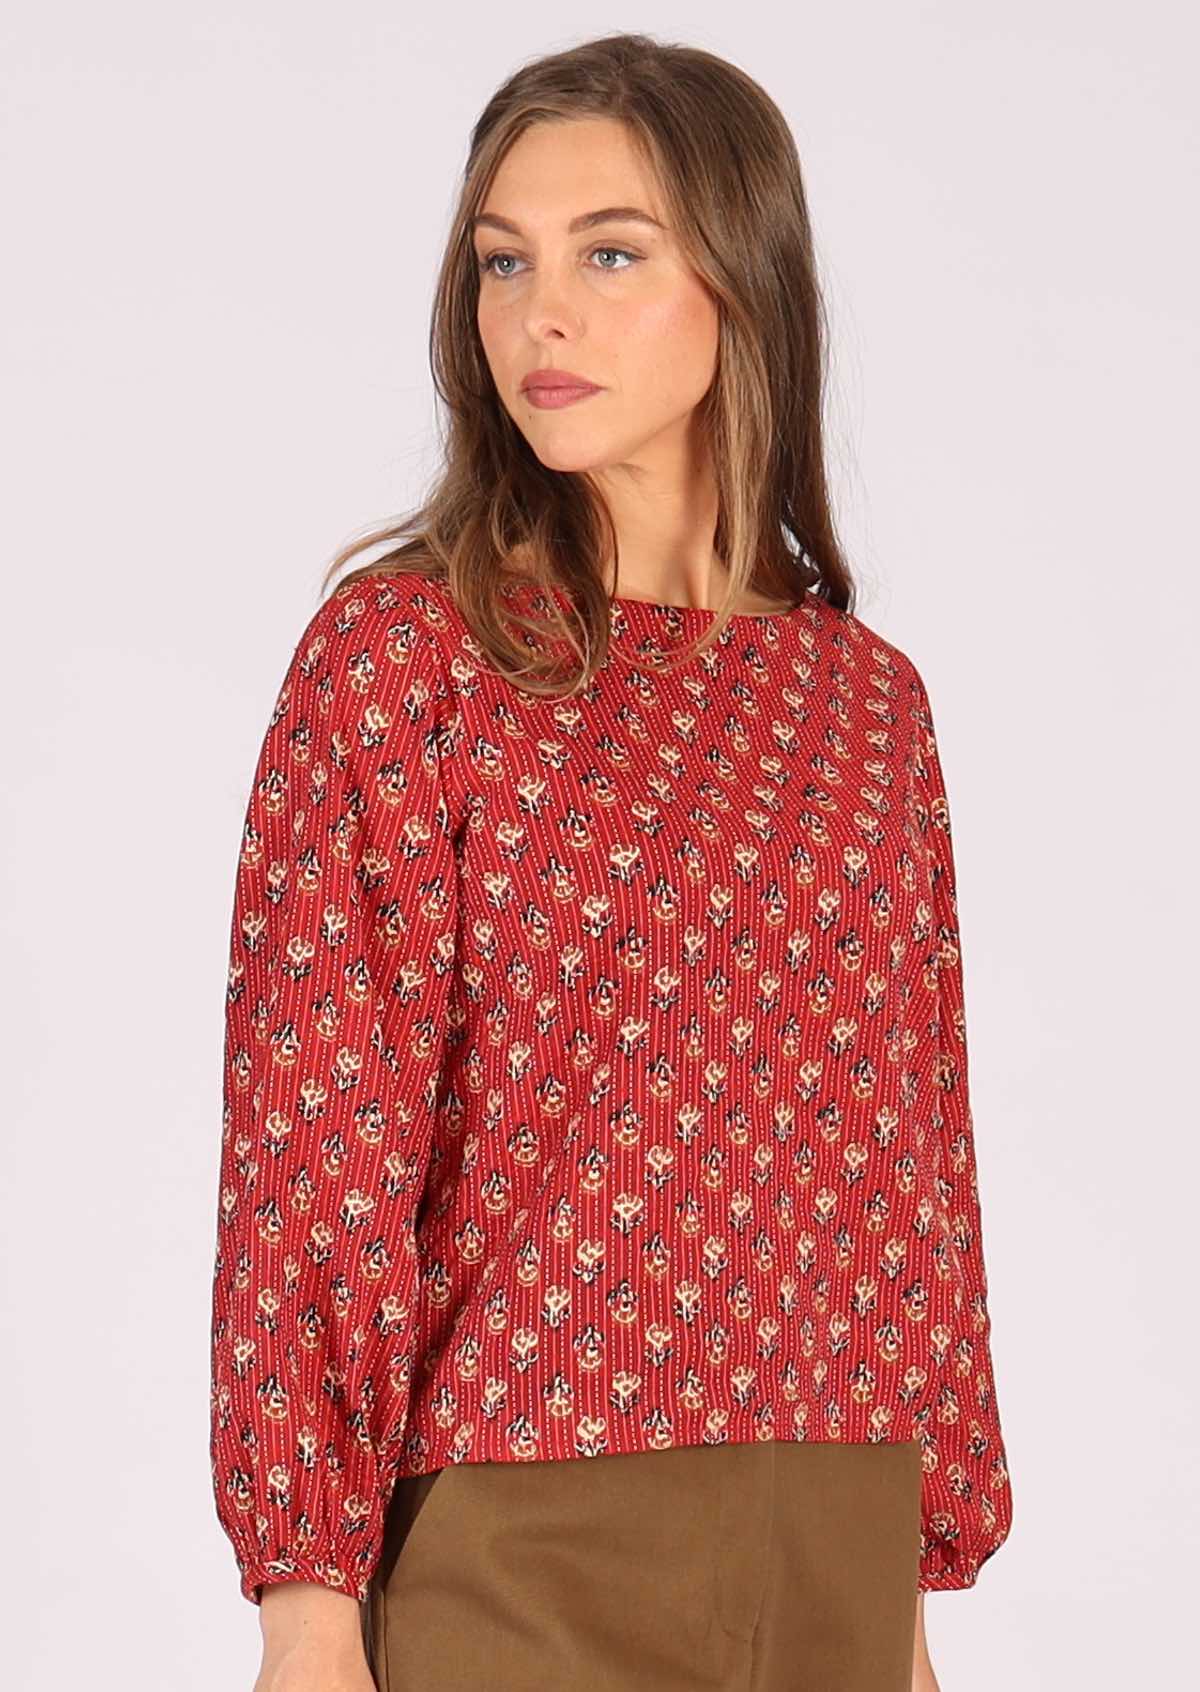 Lightweight cotton top in deep red with flowers and kantha stitches